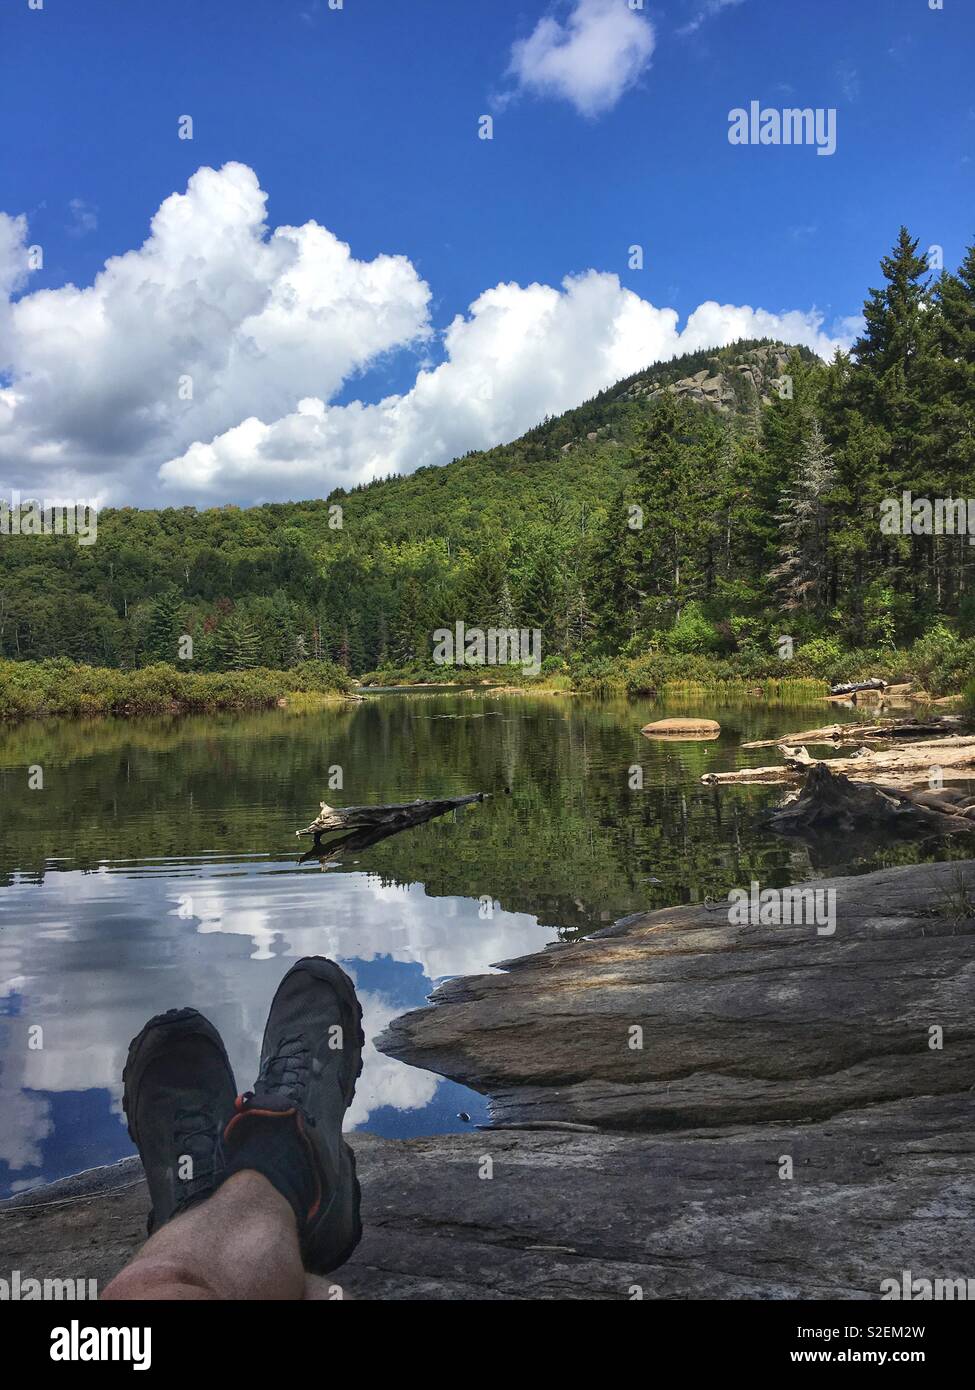 Hiker’s Feet with boots in Adirondack Mountains by lake, New York, NY, USA Stock Photo